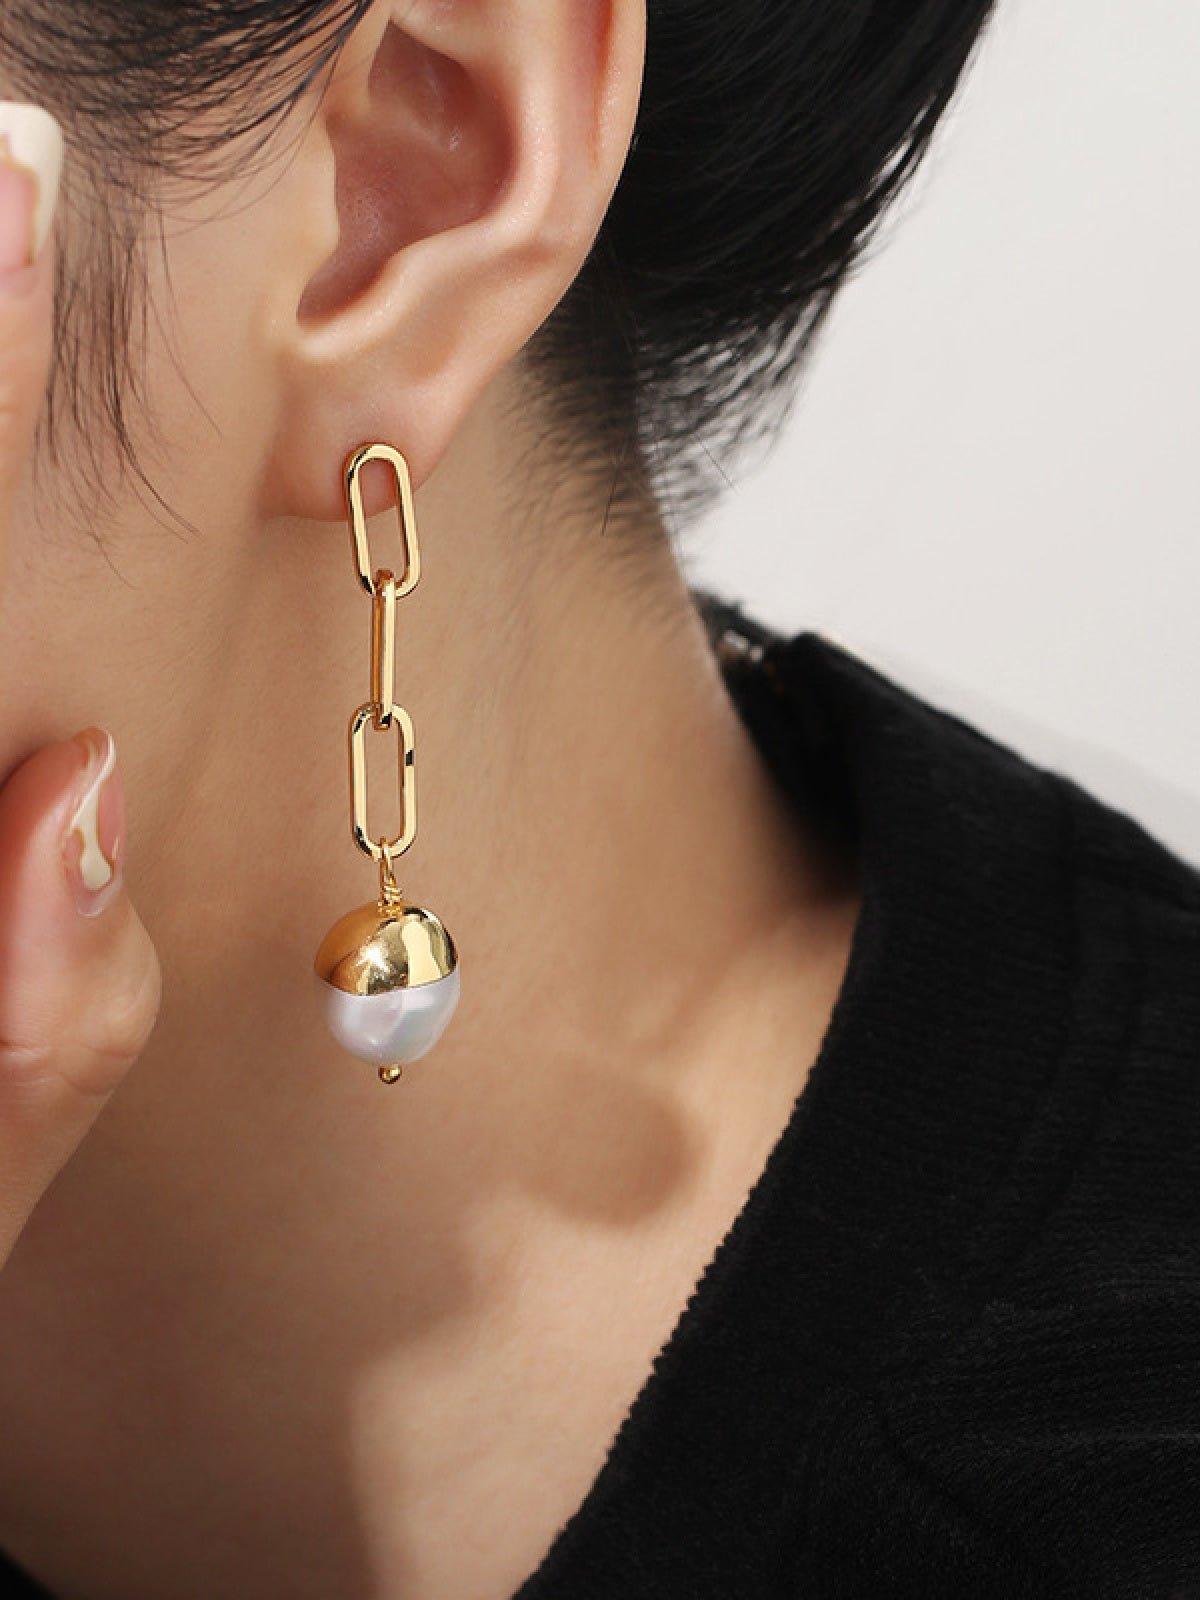 Link Chain Pearl Drop Fashion Earrings Gold Plated